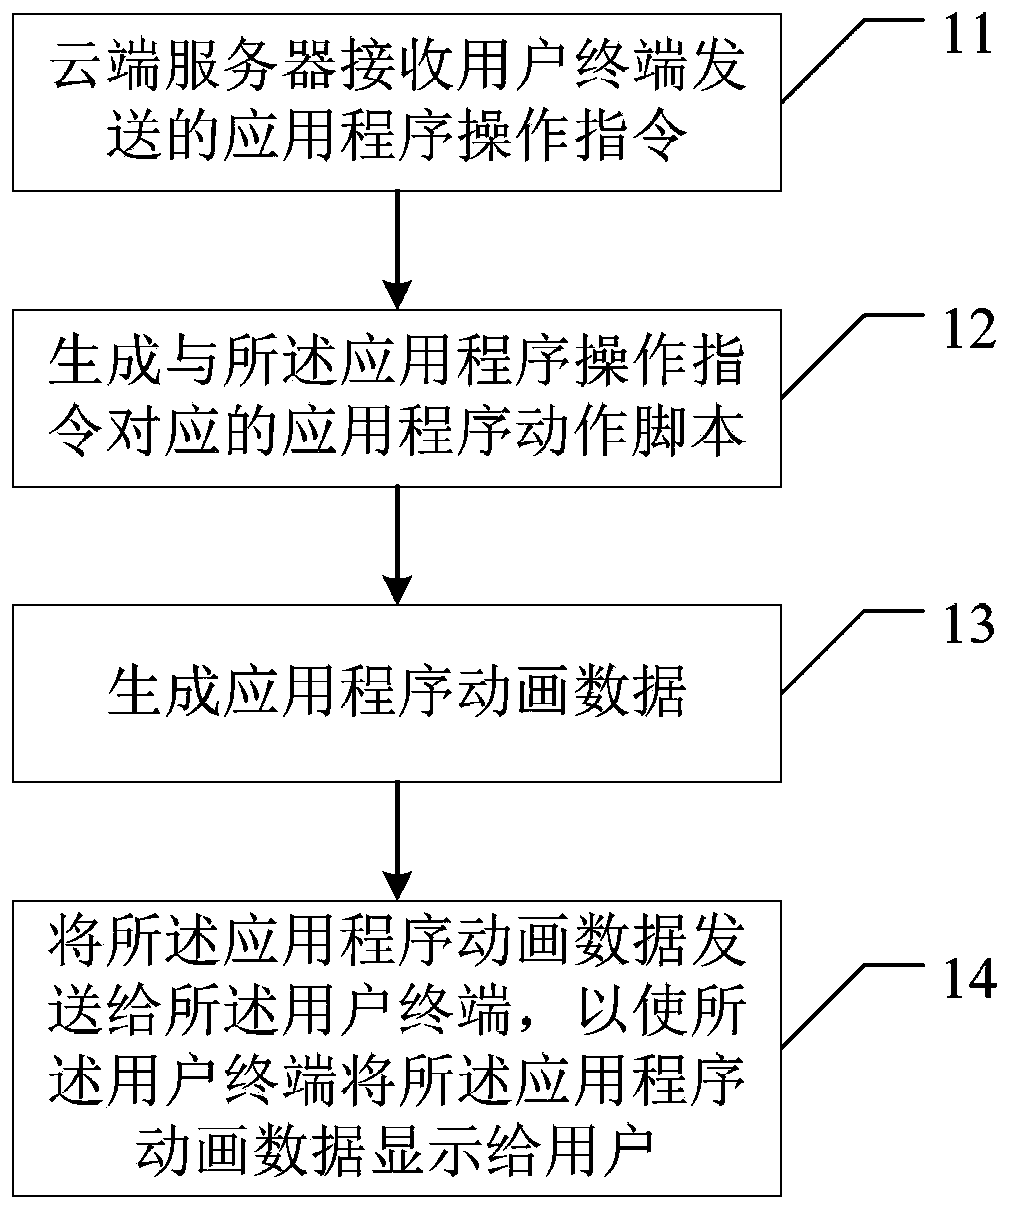 Application data processing method, device and system